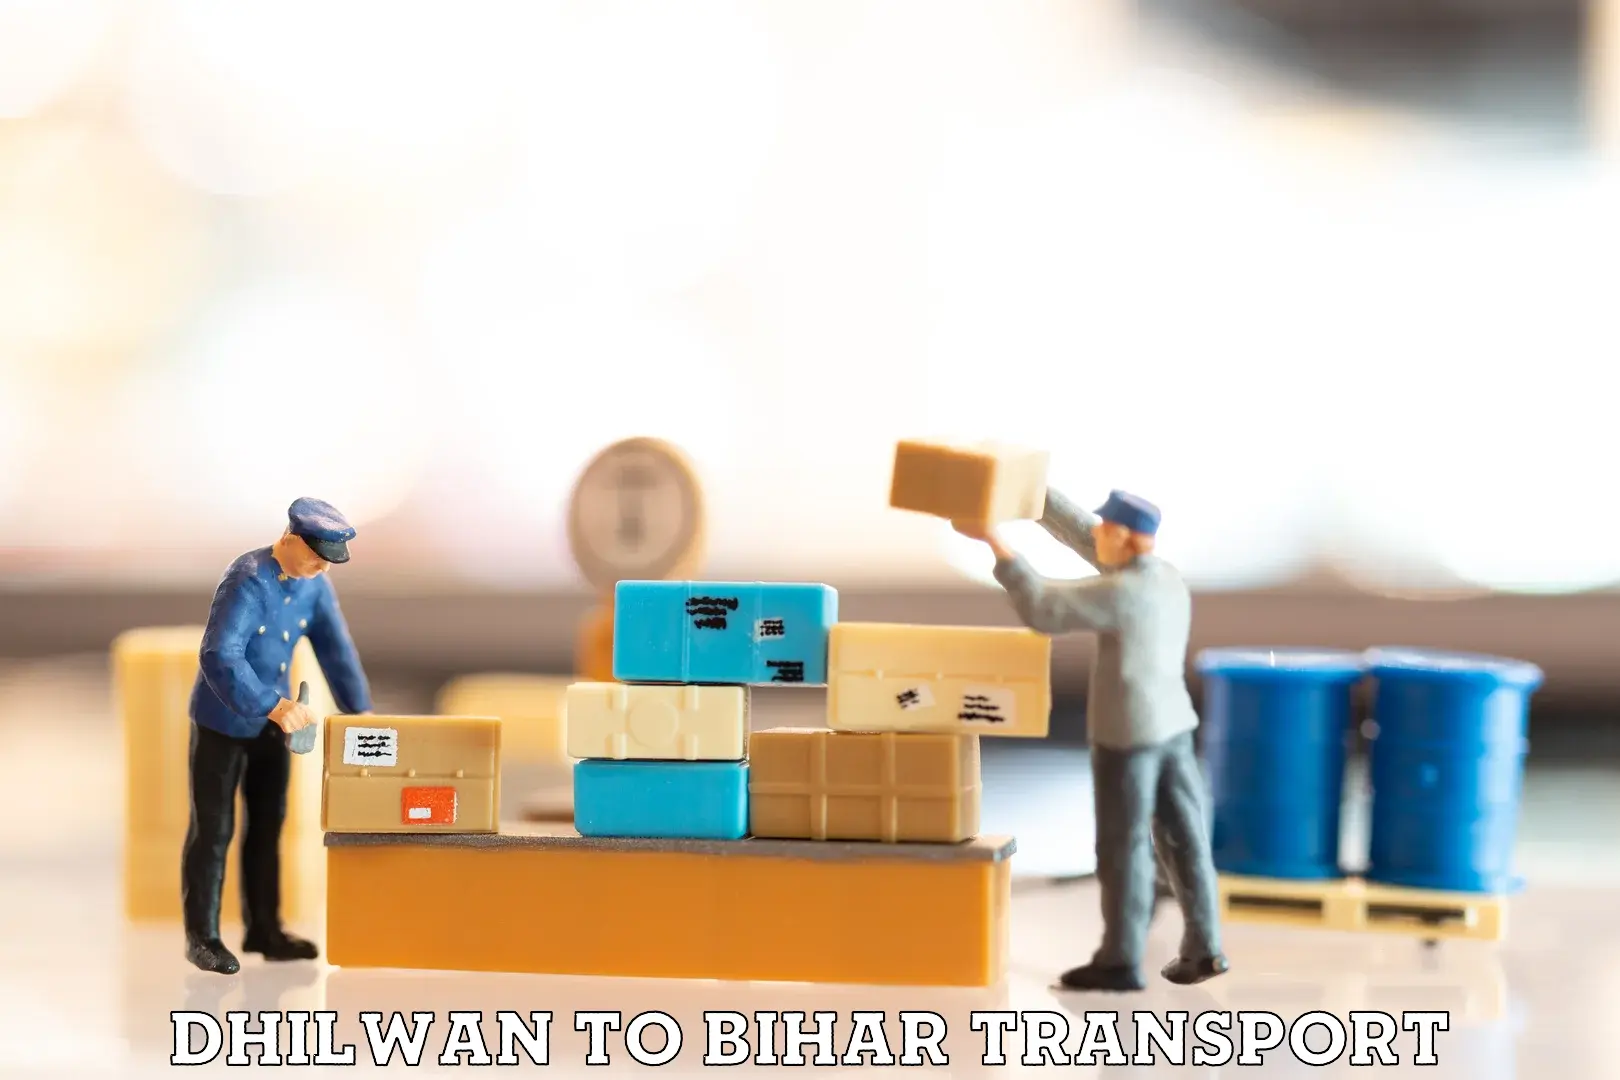 Transport in sharing in Dhilwan to Fatwah